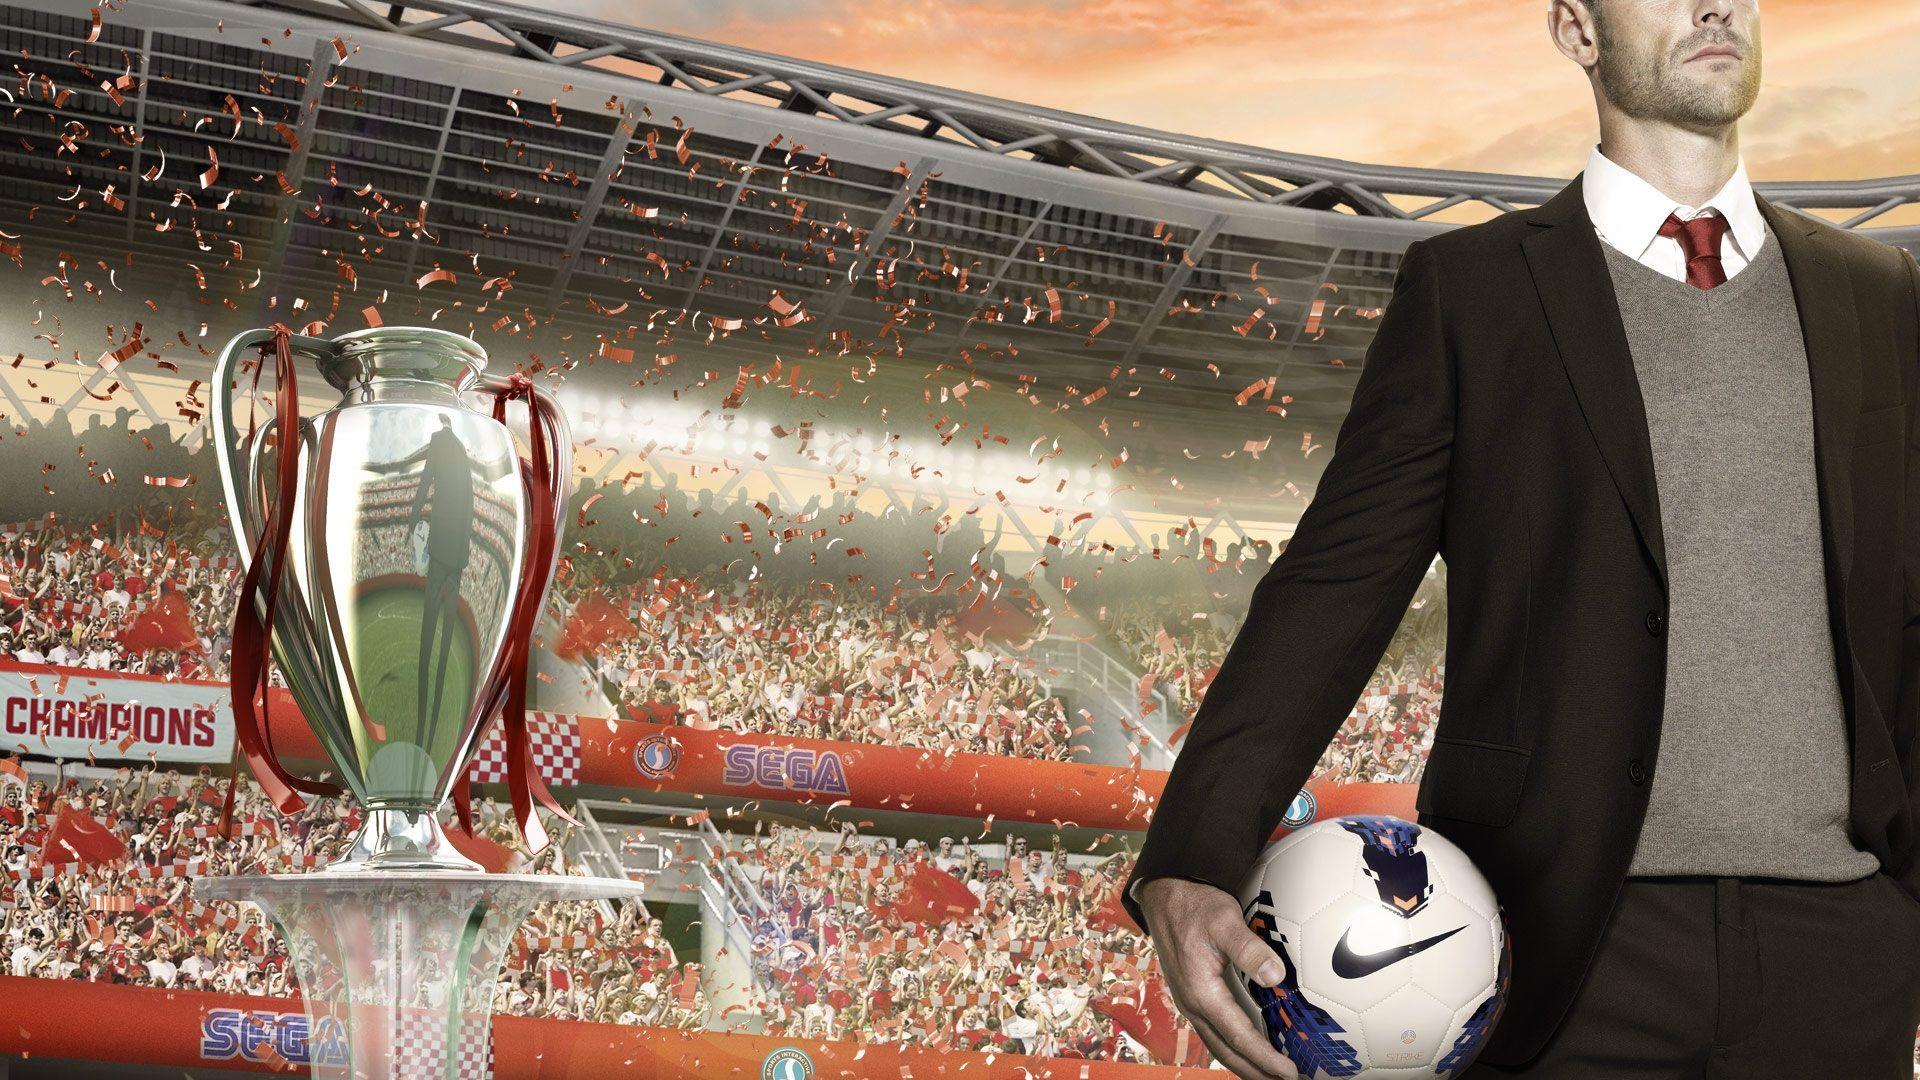 Football Manager 2022 Wallpapers